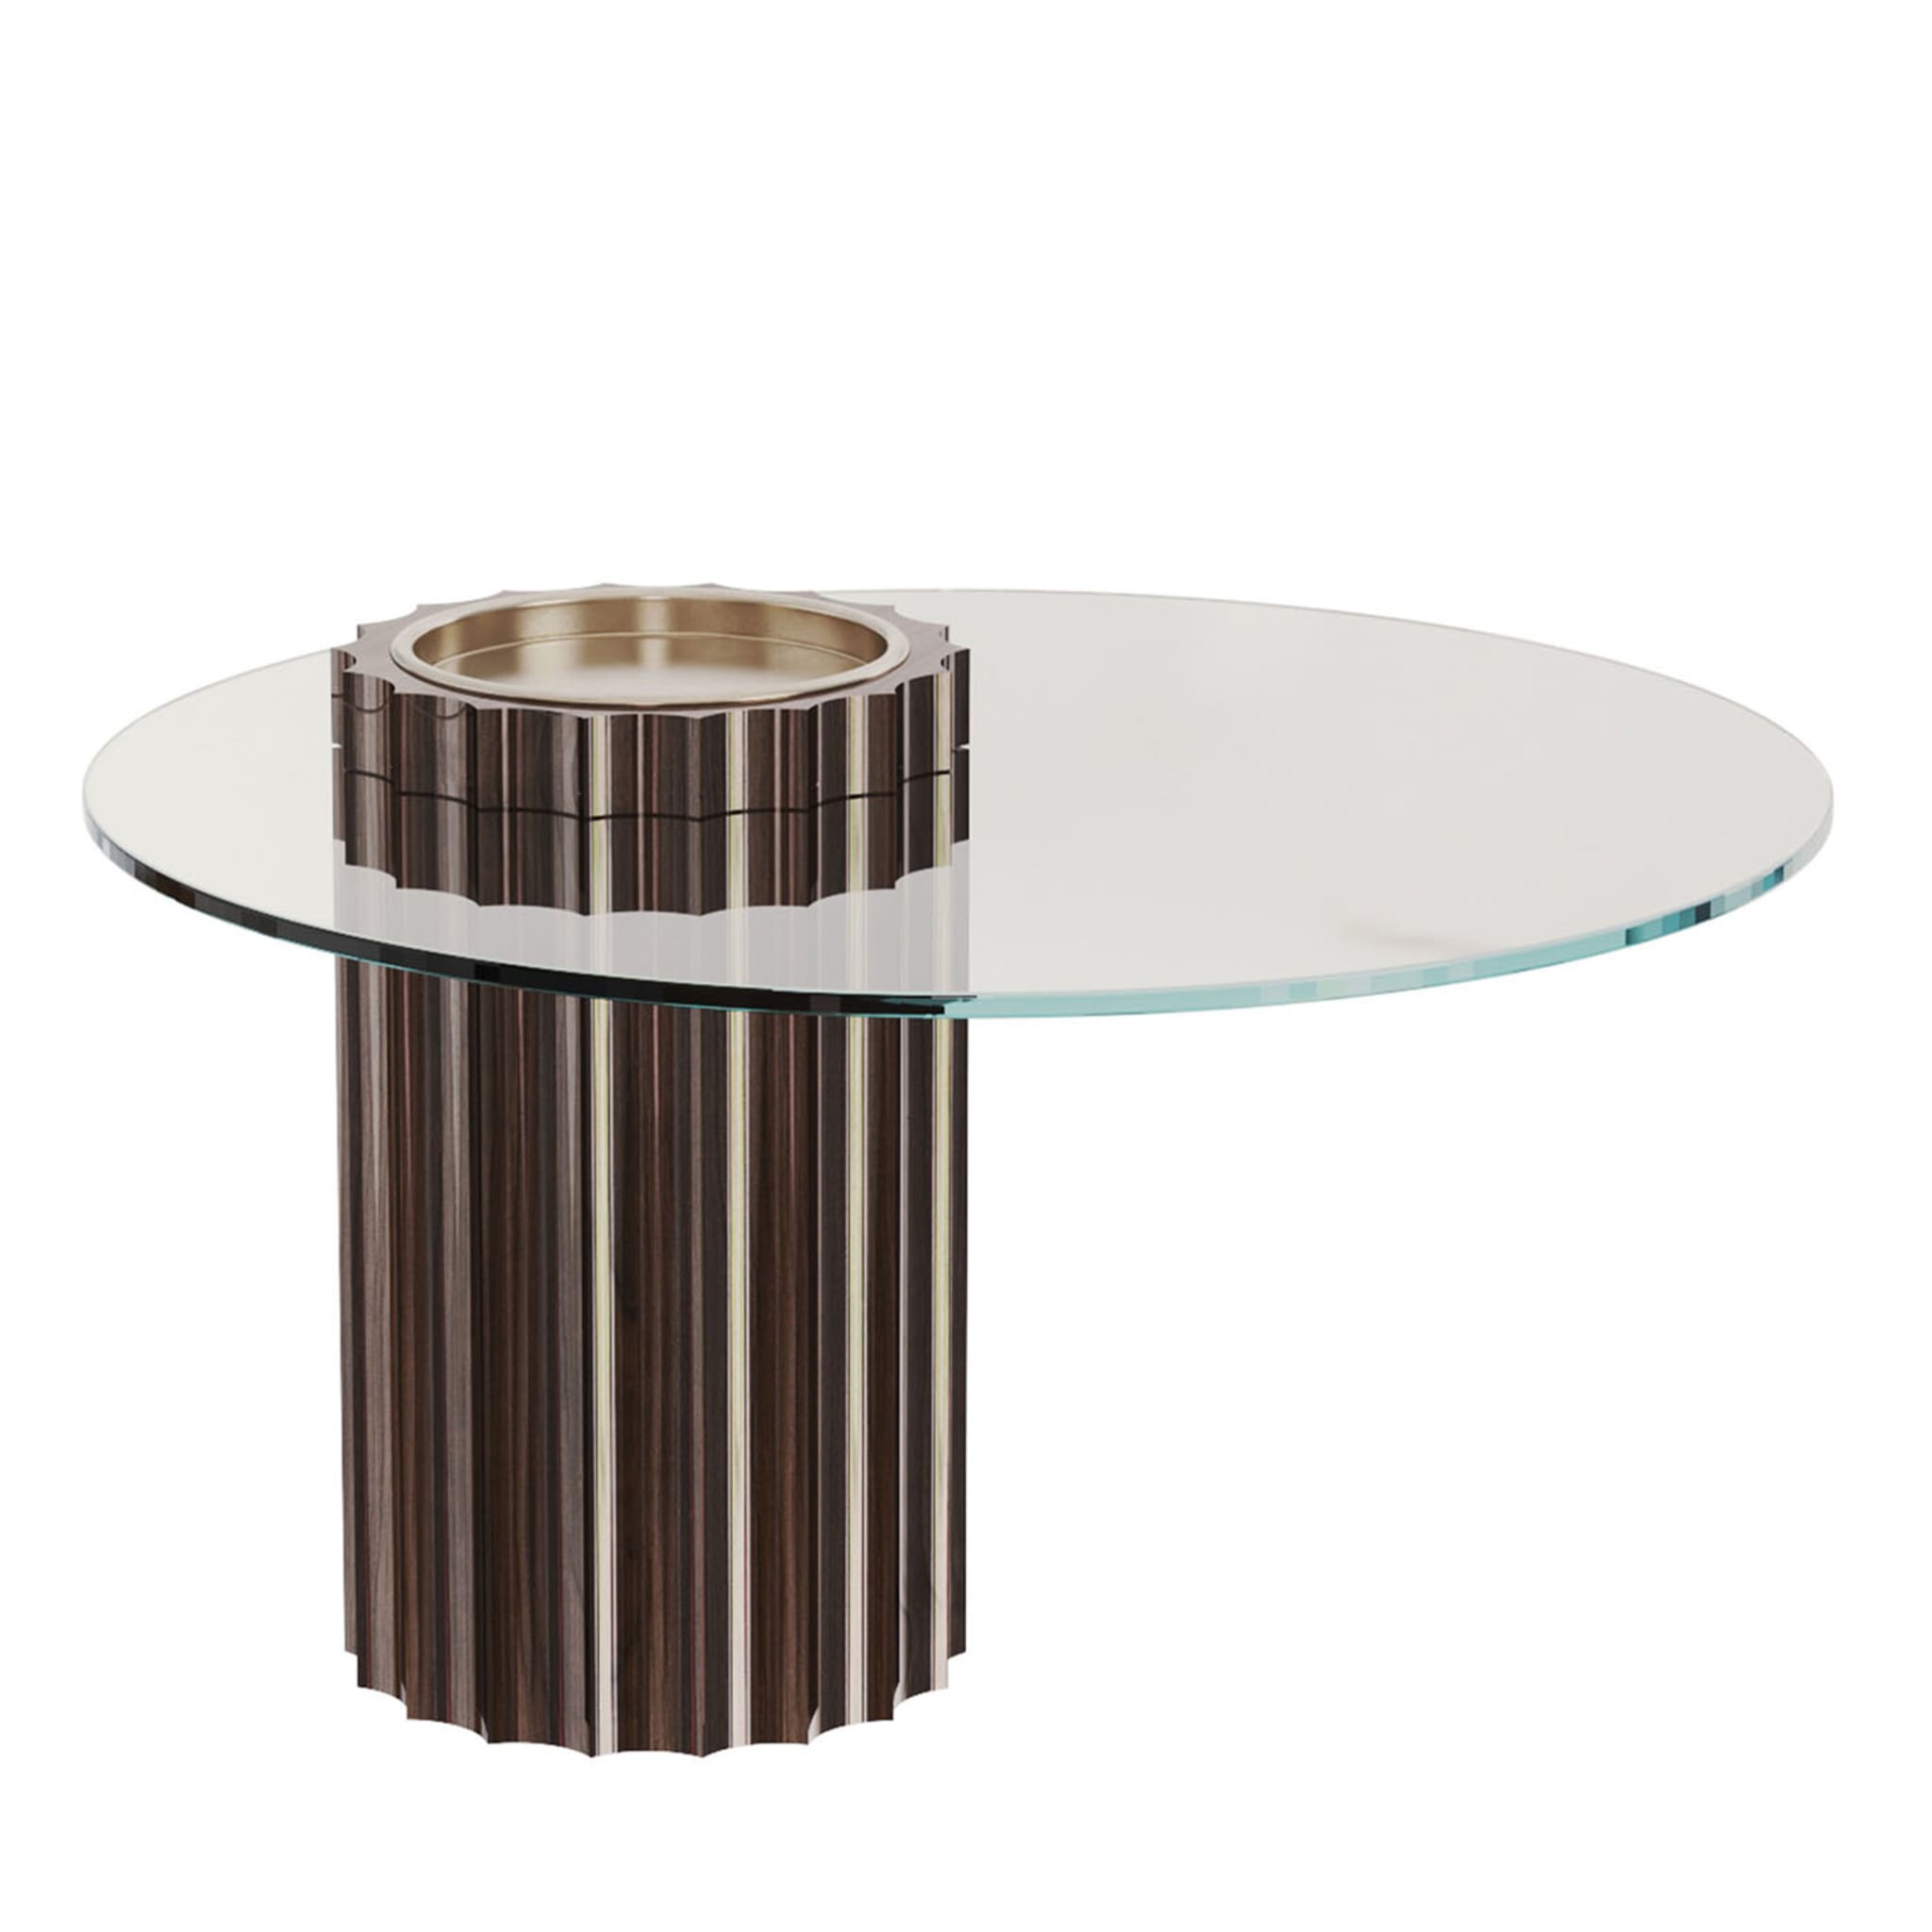 Modern Art Deco Coffee Table In Lacquered Dark Wood With Glass 70c - Main view